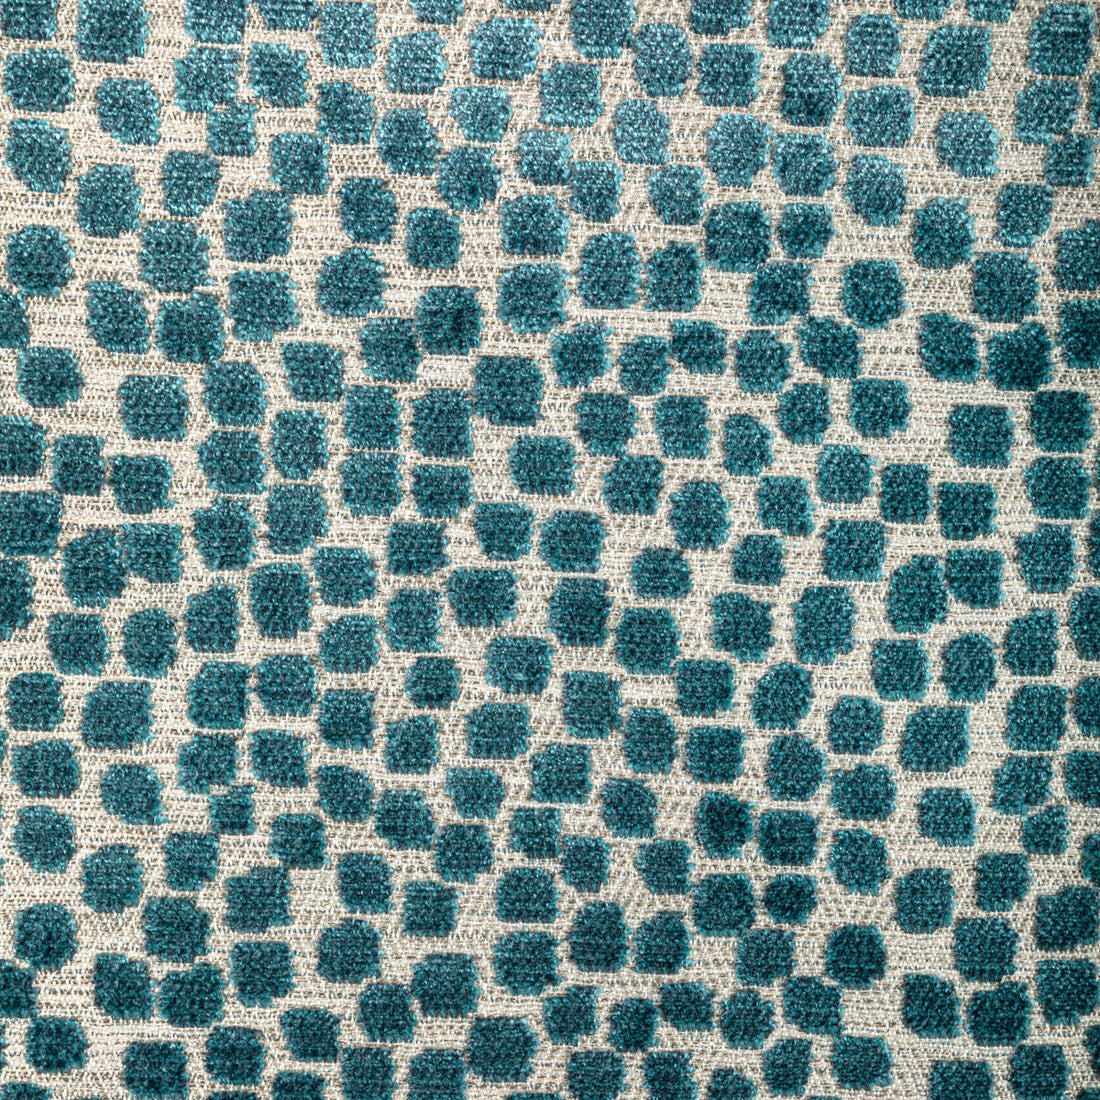 Flurries fabric in teal color - pattern 34849.35.0 - by Kravet Design in the Thom Filicia collection